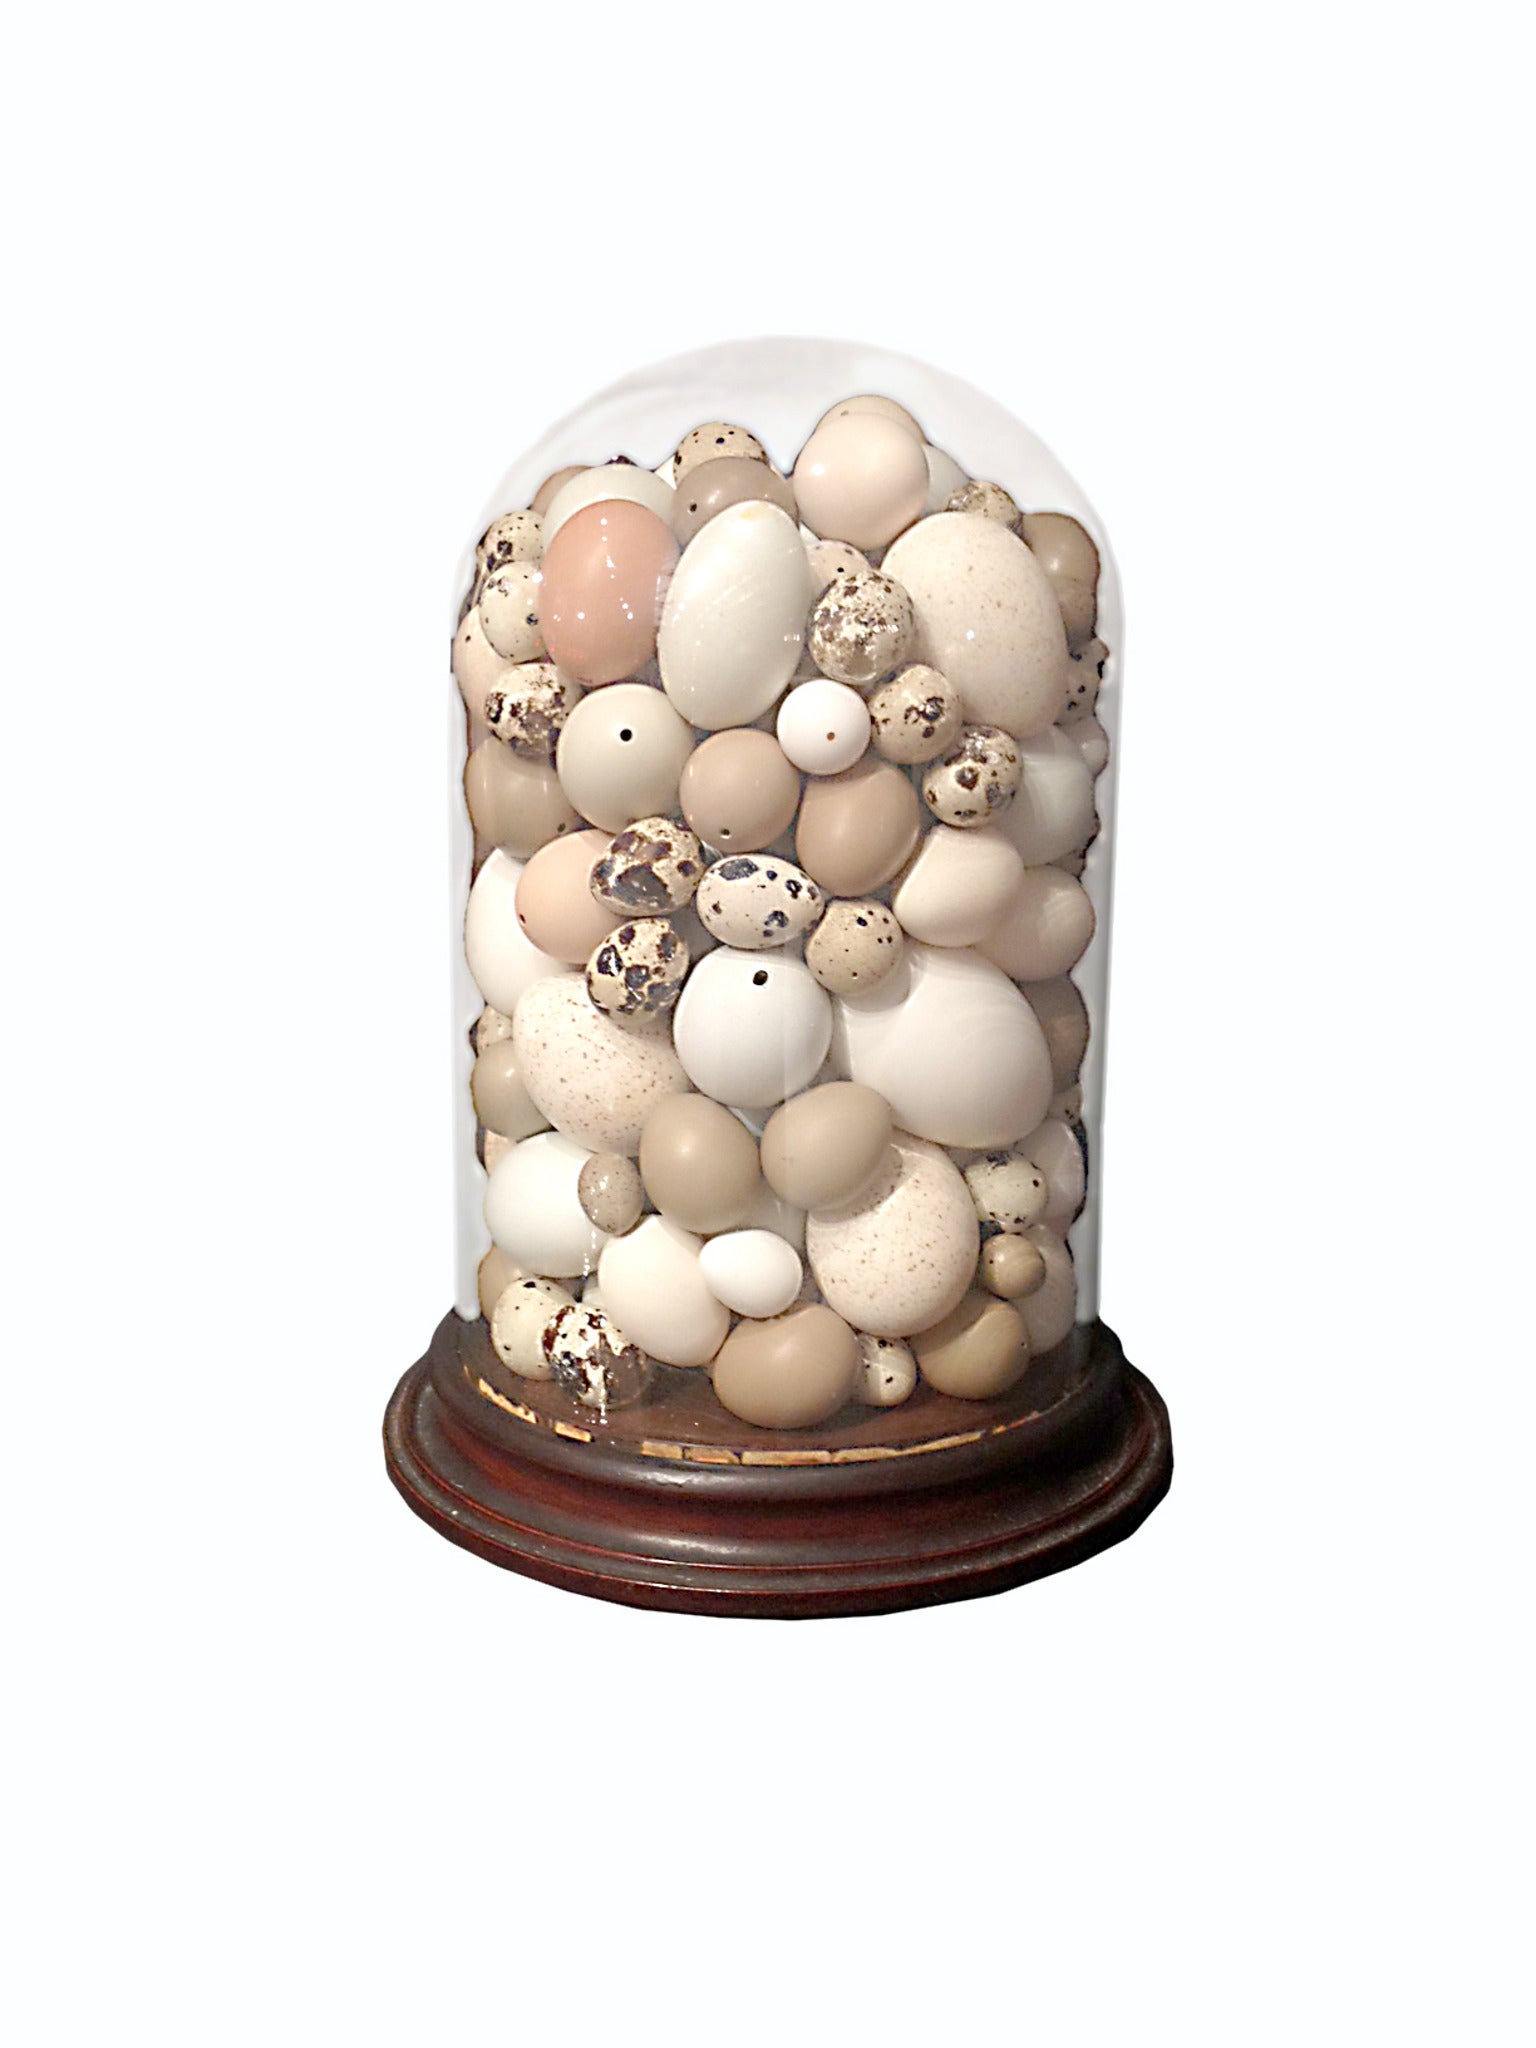 Rare victorian collection of different bird's eggs.